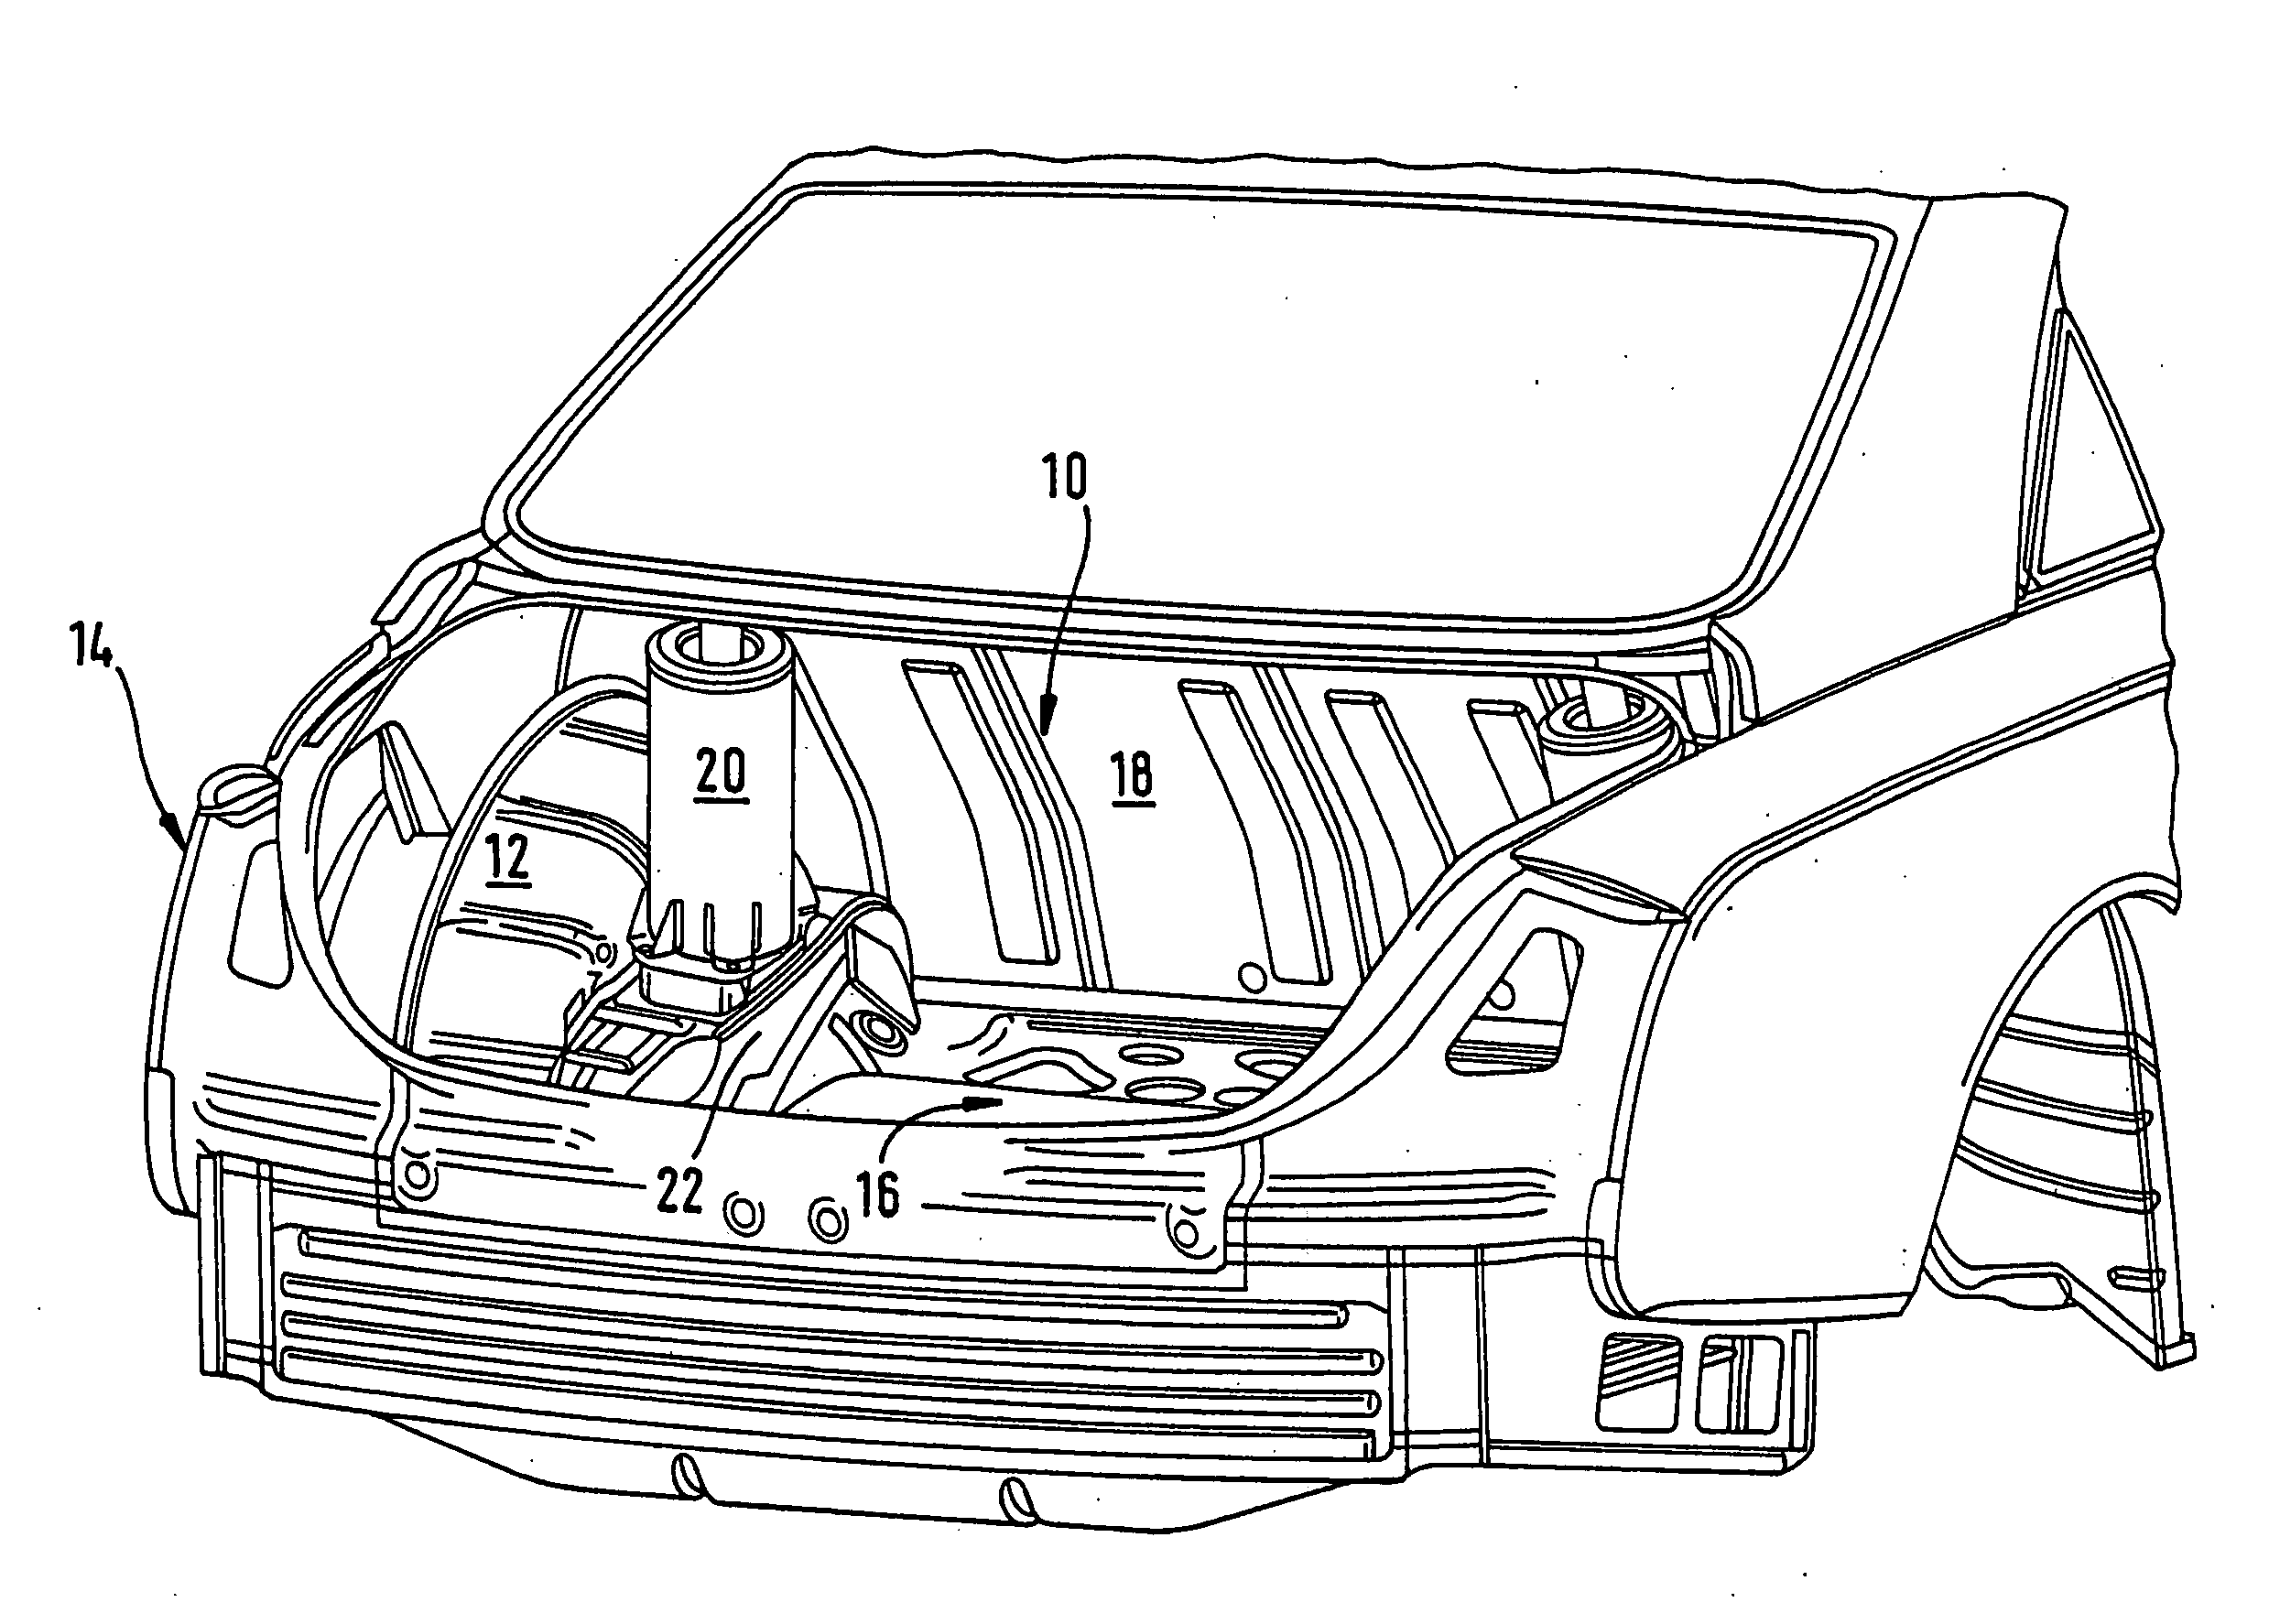 Fixing arrangemenrt for a spring and/or damping element to a hollow support on a motor vehicle chassis